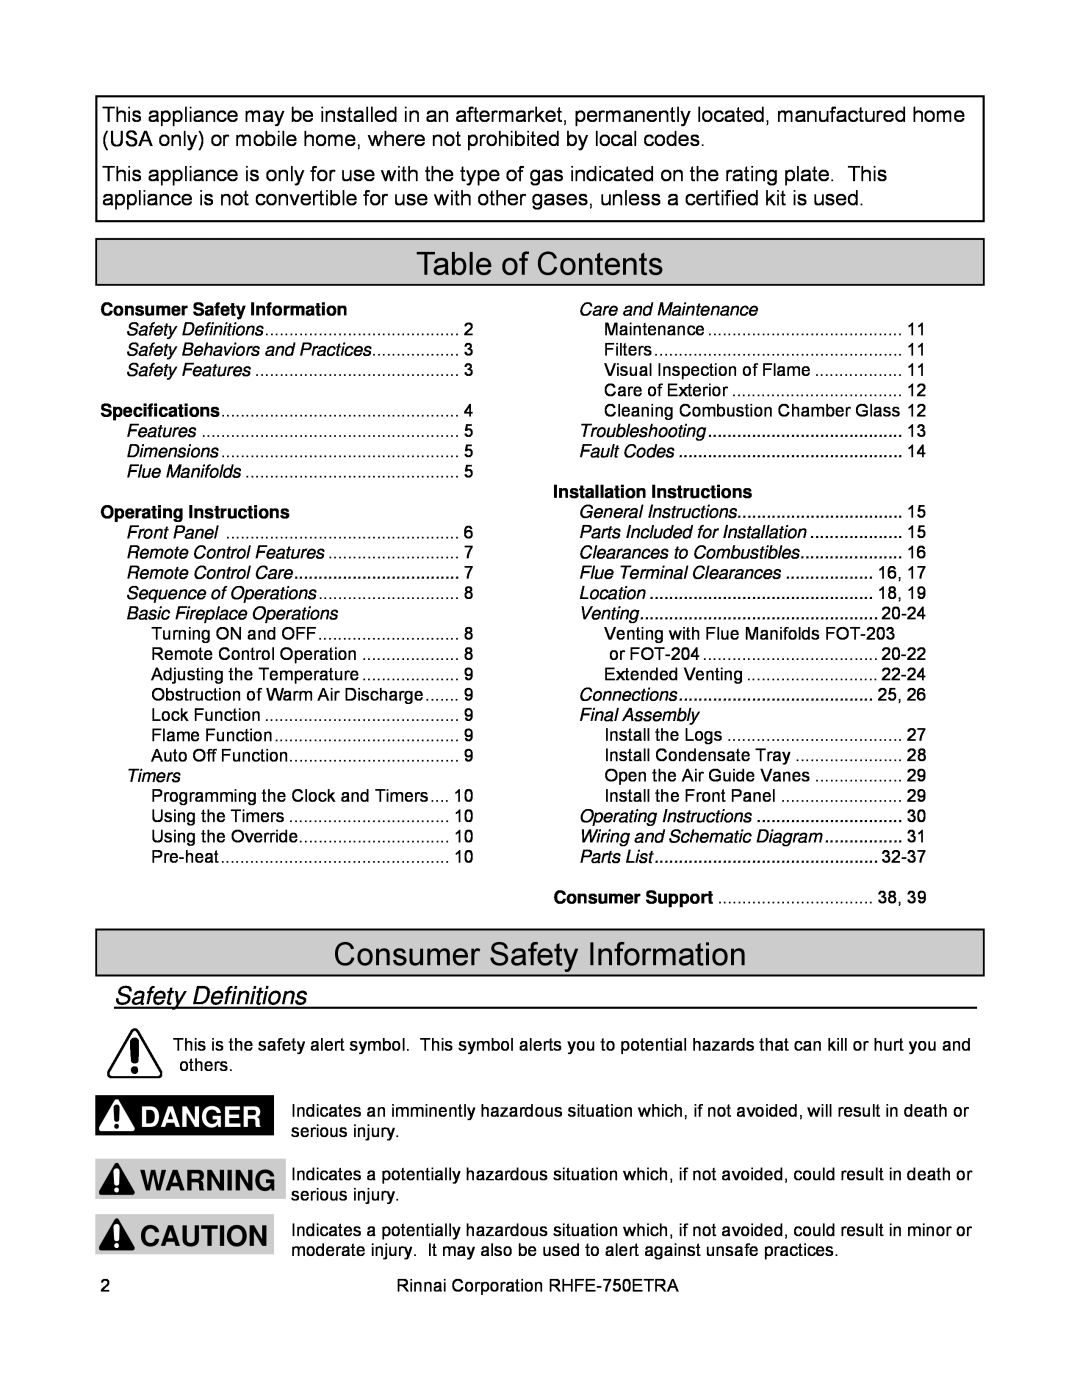 Rinnai RHFE-750ETRA installation manual Table of Contents, Consumer Safety Information, Safety Definitions, Danger 